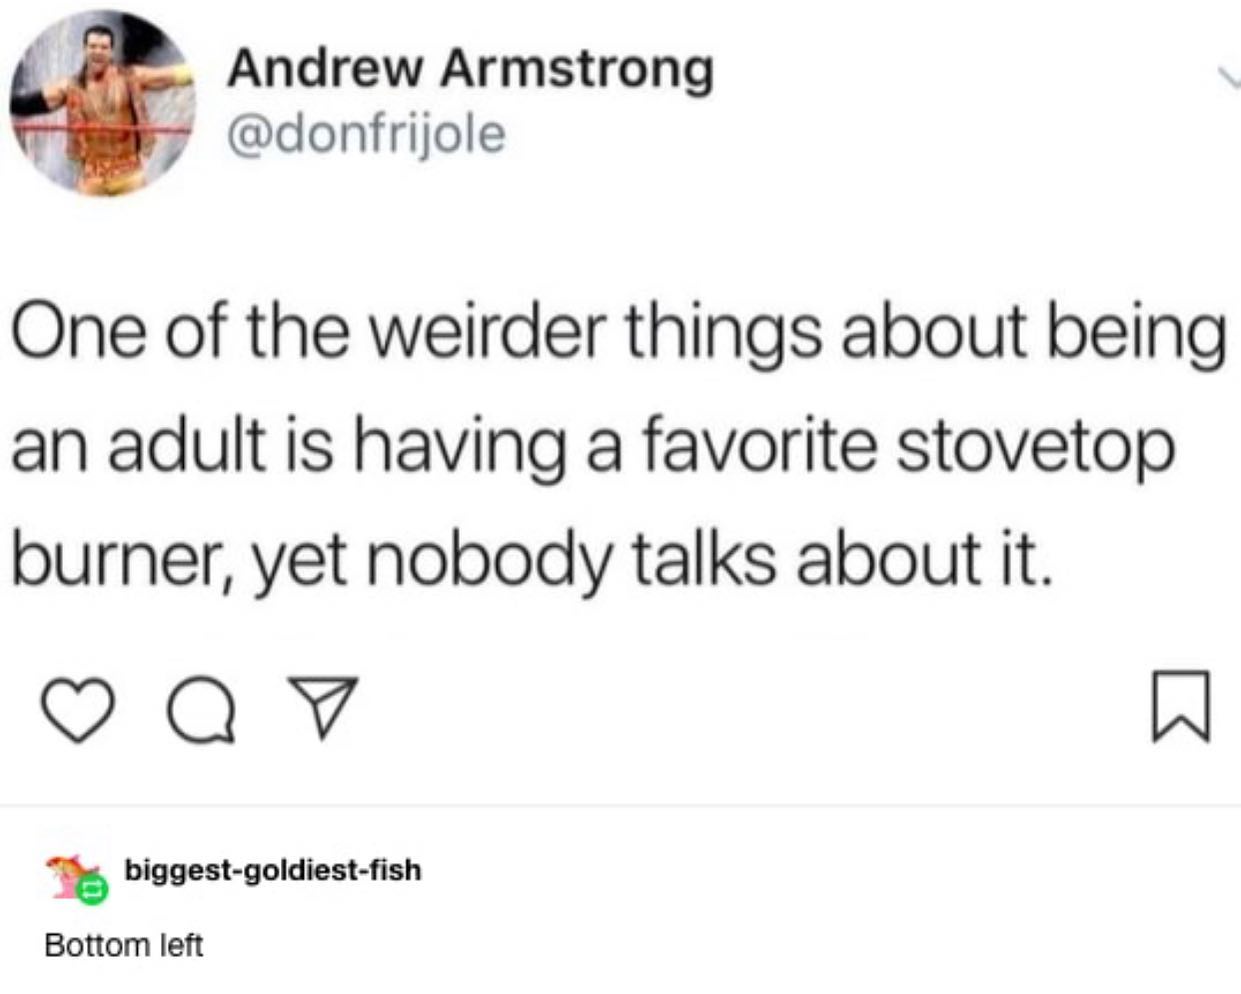 dank memes - bag salad meme - Andrew Armstrong One of the weirder things about being an adult is having a favorite stovetop burner, yet nobody talks about it Q a biggestgoldiestfish Bottom left